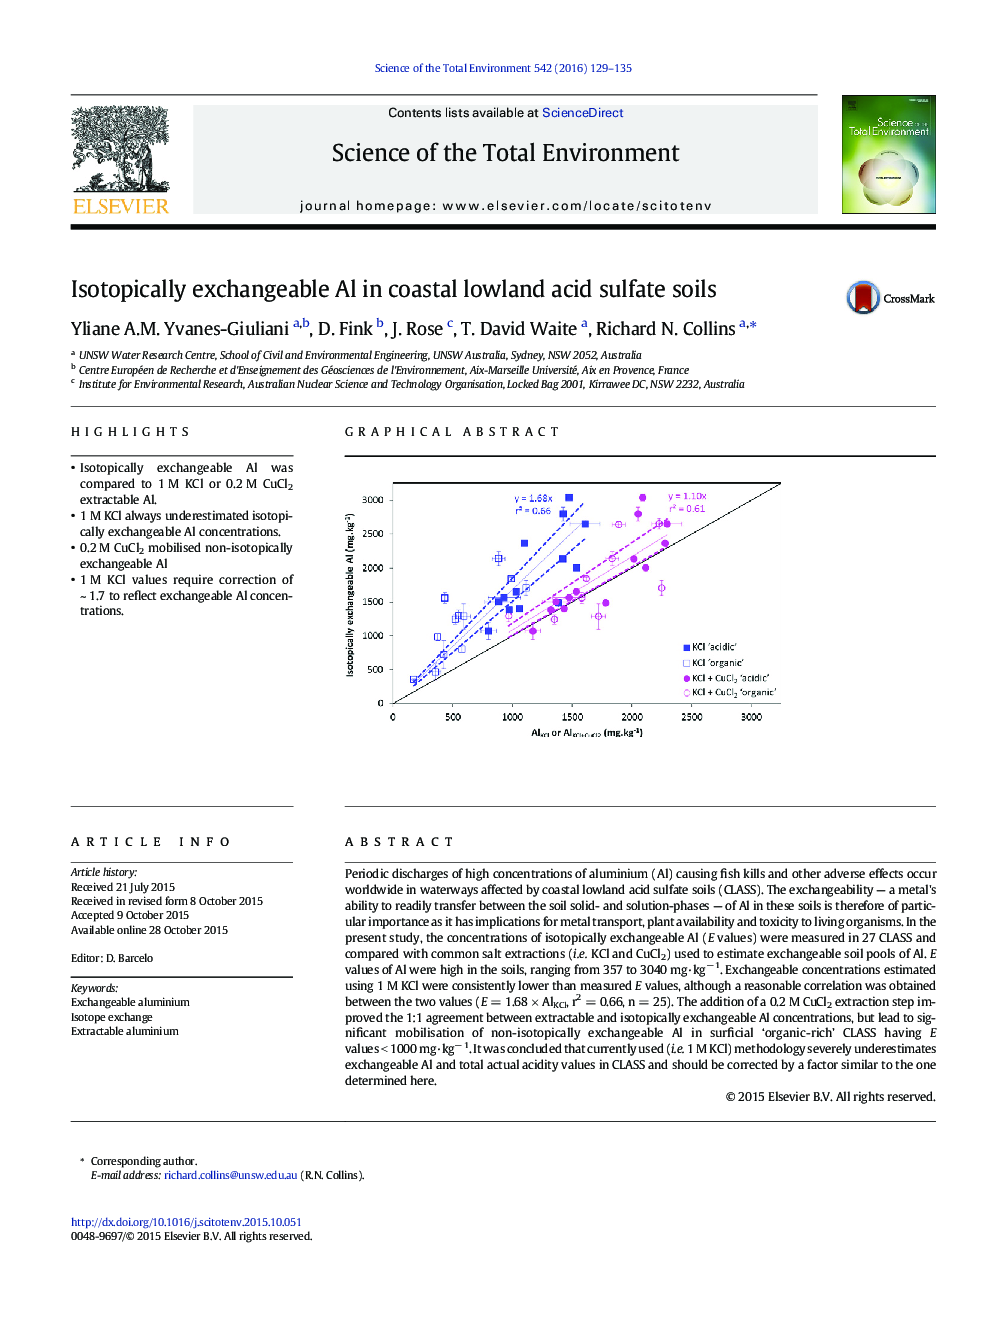 Isotopically exchangeable Al in coastal lowland acid sulfate soils